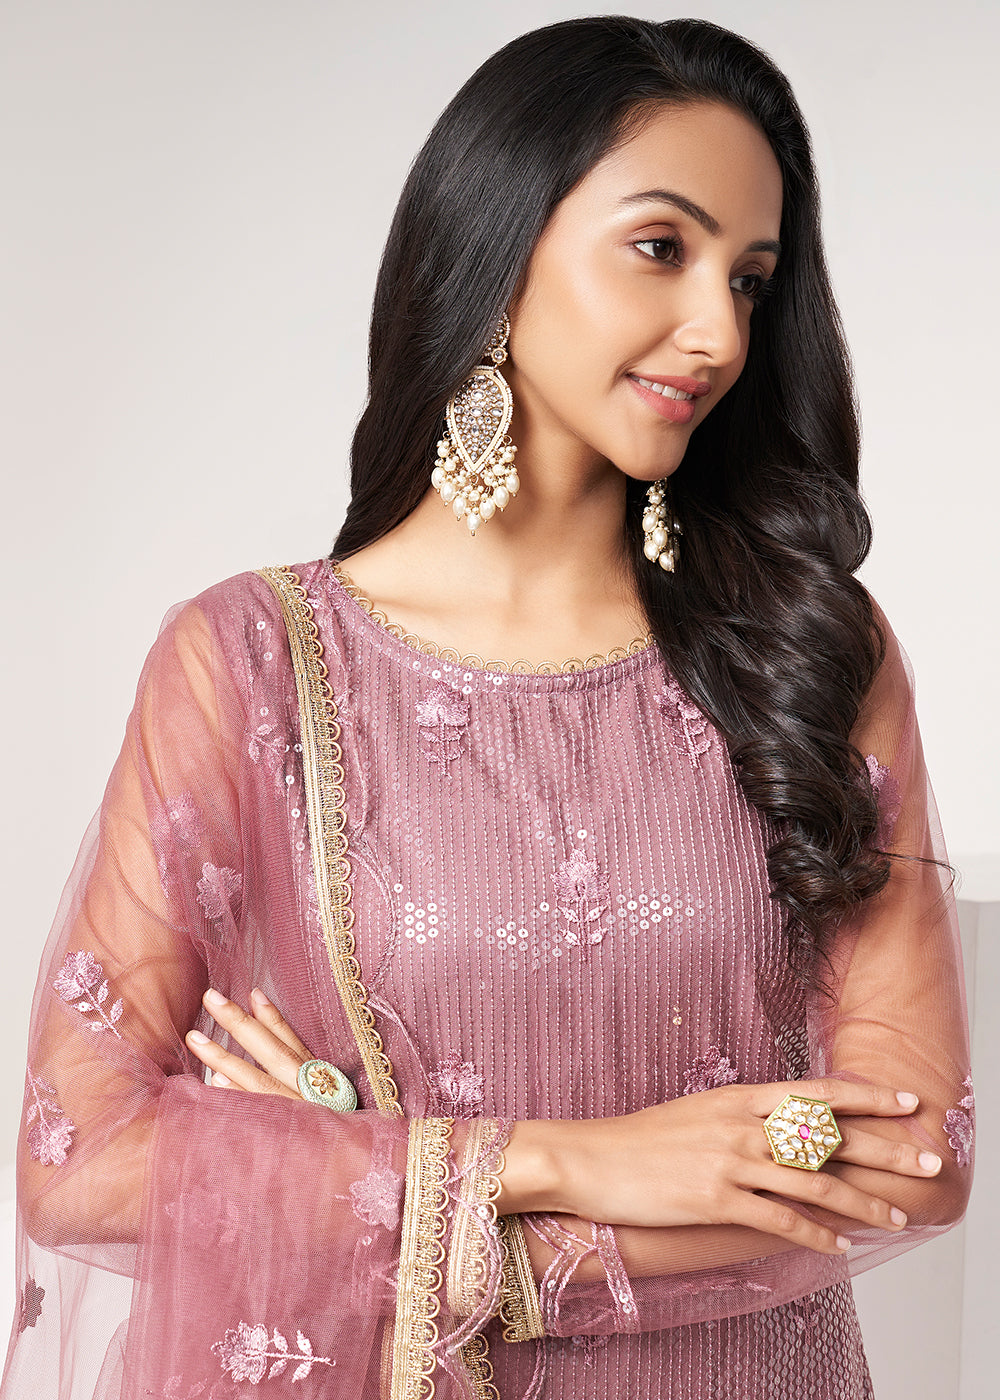 Buy Now Onion Pink Net Embroidered Festive Salwar Suit Online in USA, UK, Canada, Germany, Australia & Worldwide at Empress Clothing. 